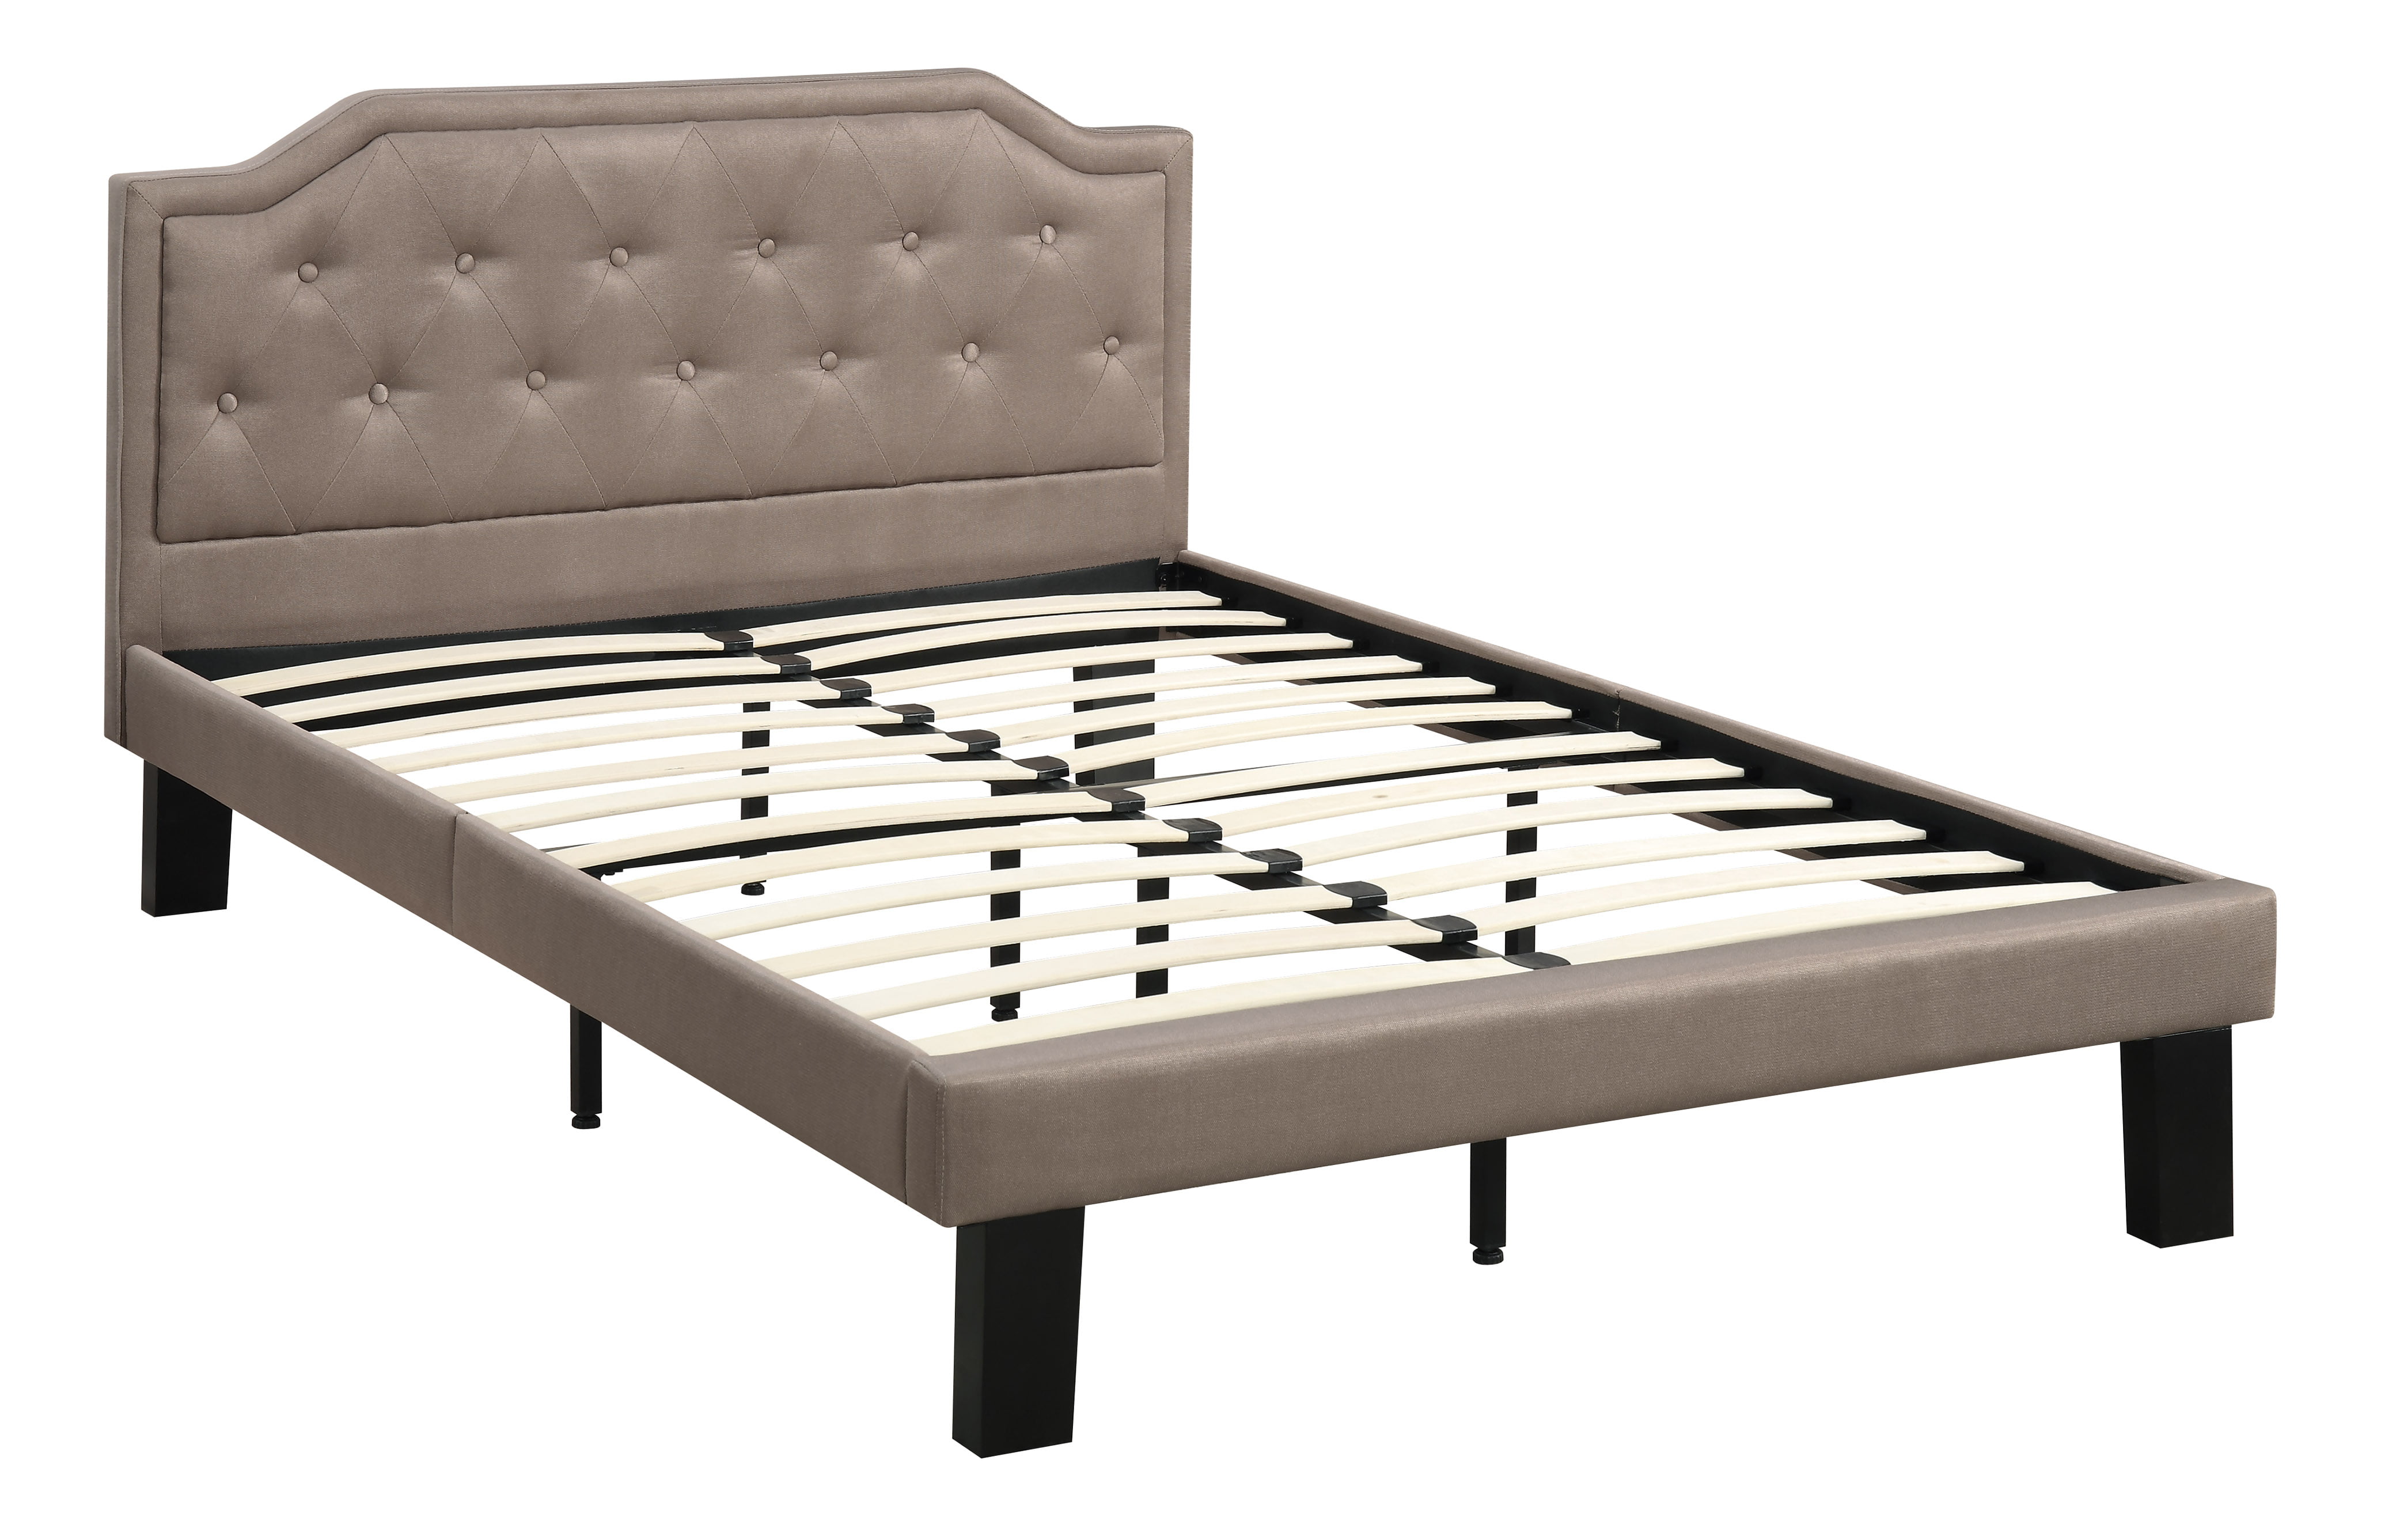 Details about   Poundex F9376T Bobkona Heartland PU Upholstered Twin Size Bed 